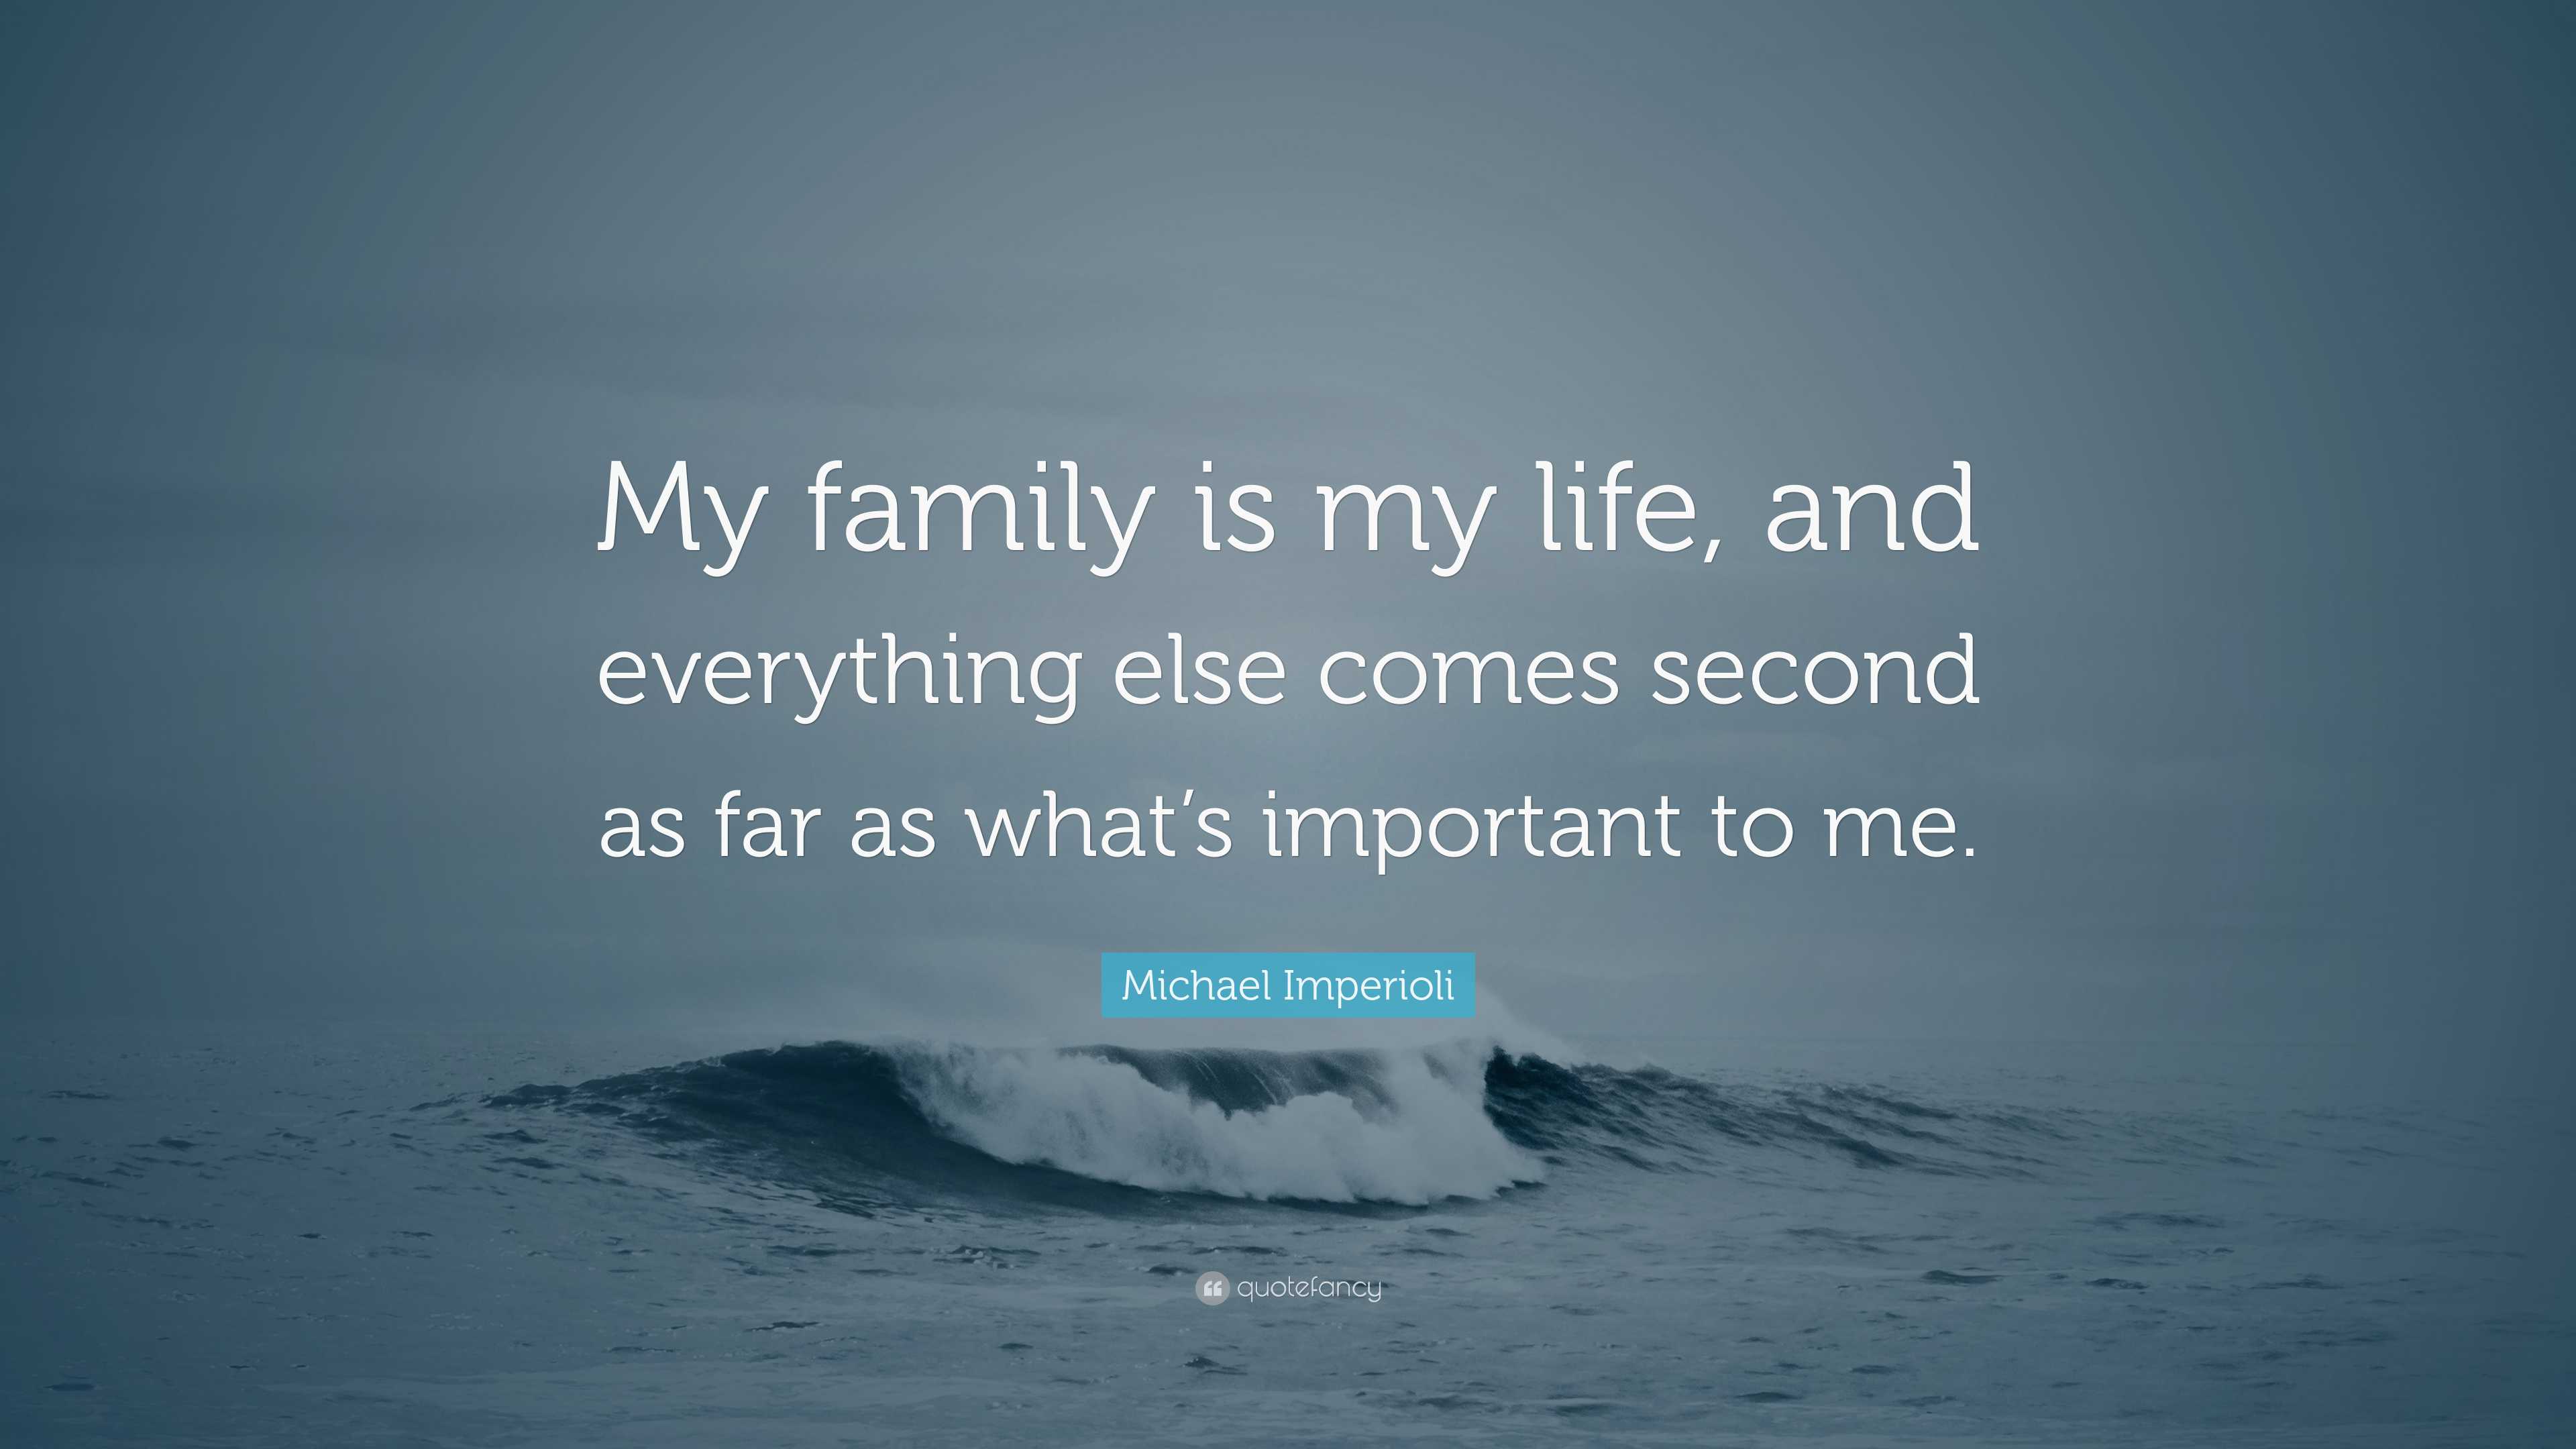 Michael Imperioli Quote: “My family is my life, and everything else ...